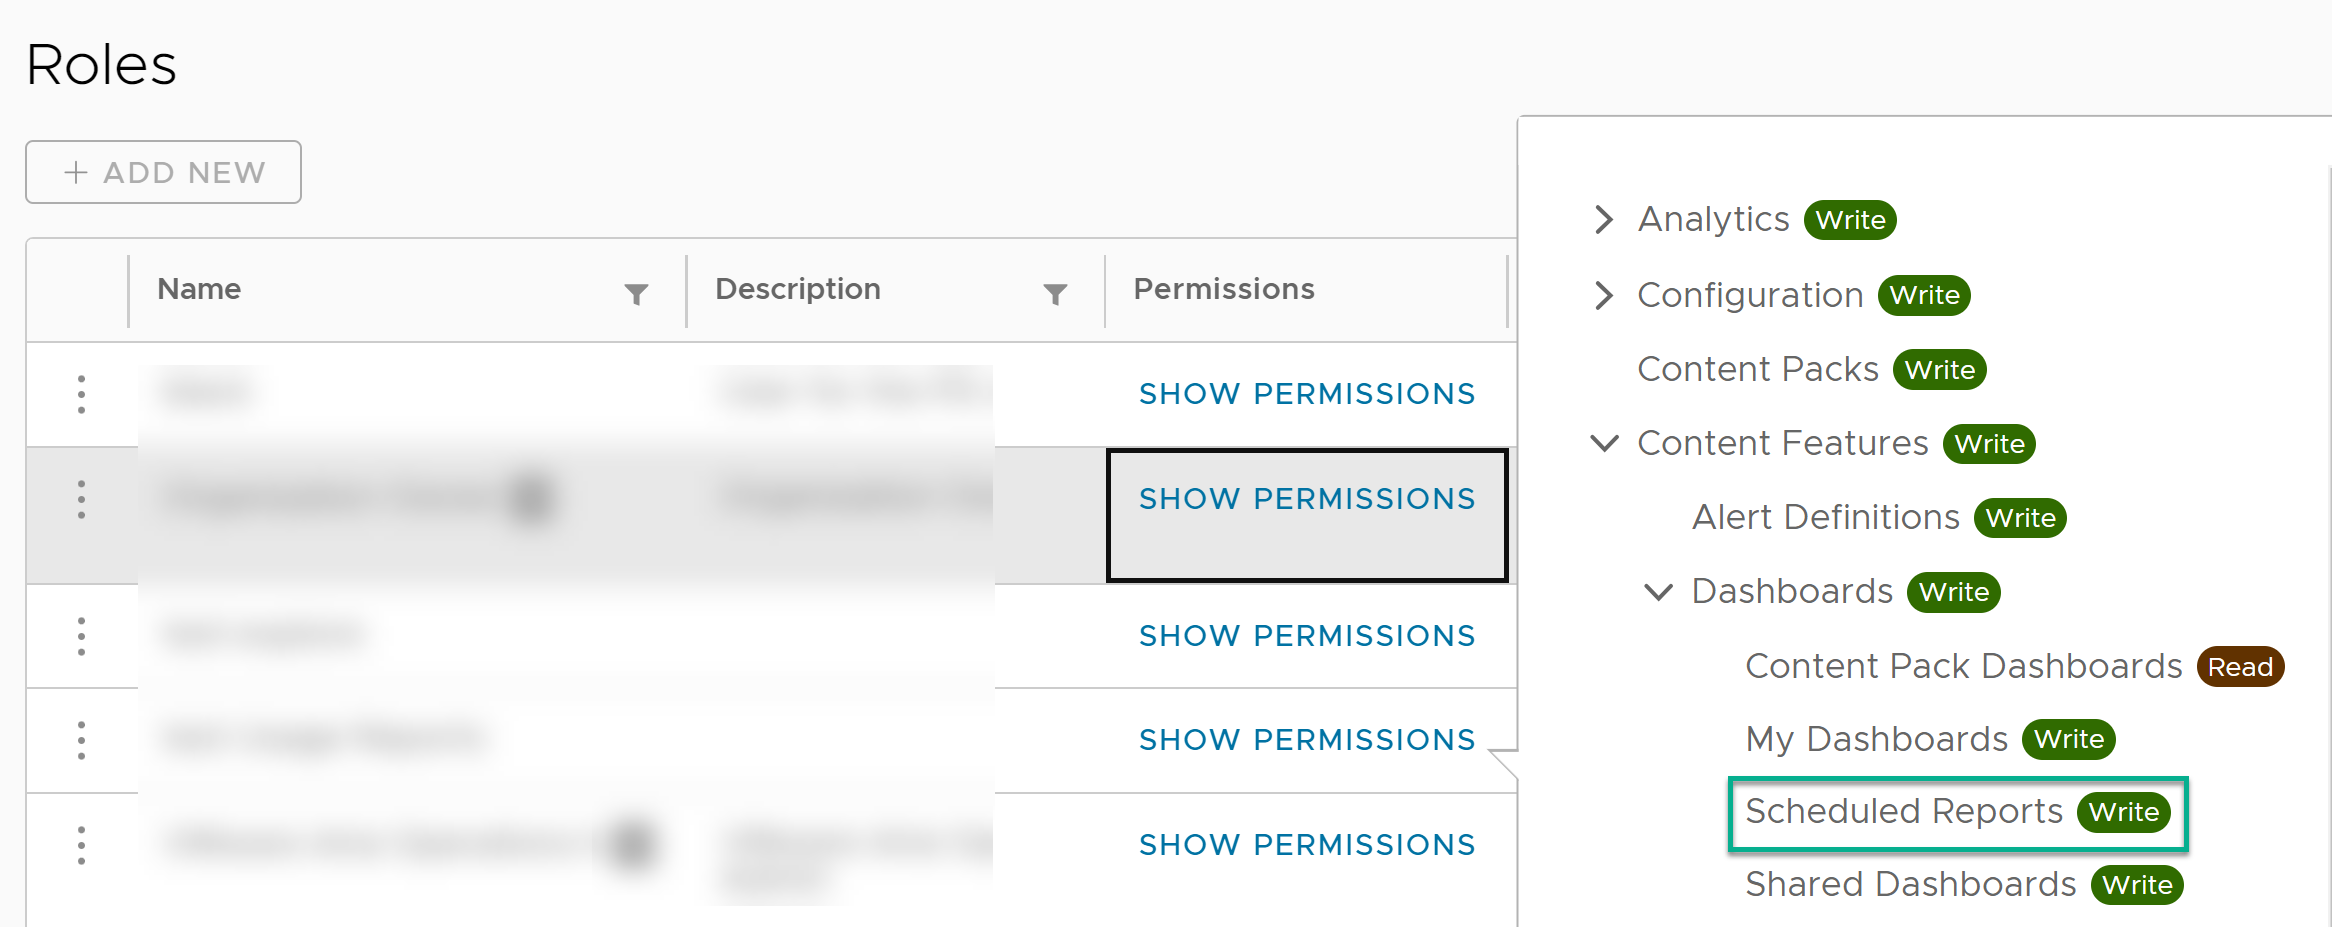 User having Write permissions to schedule reports.